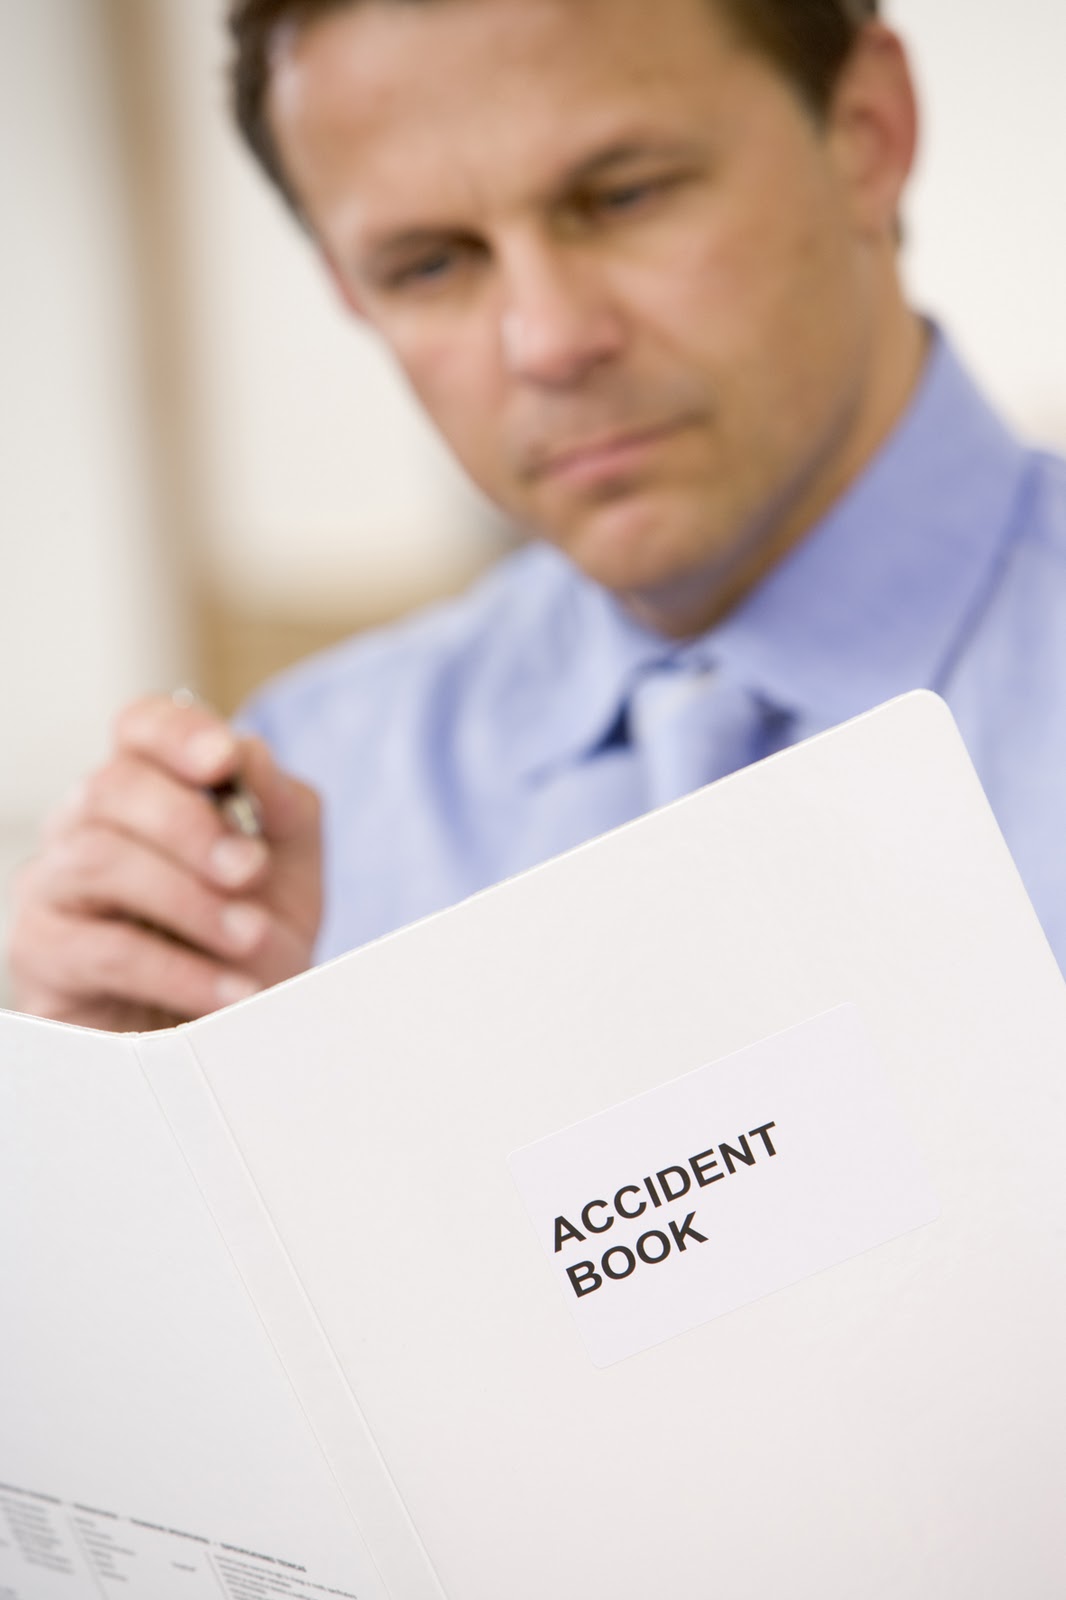 Accident+book+requirements